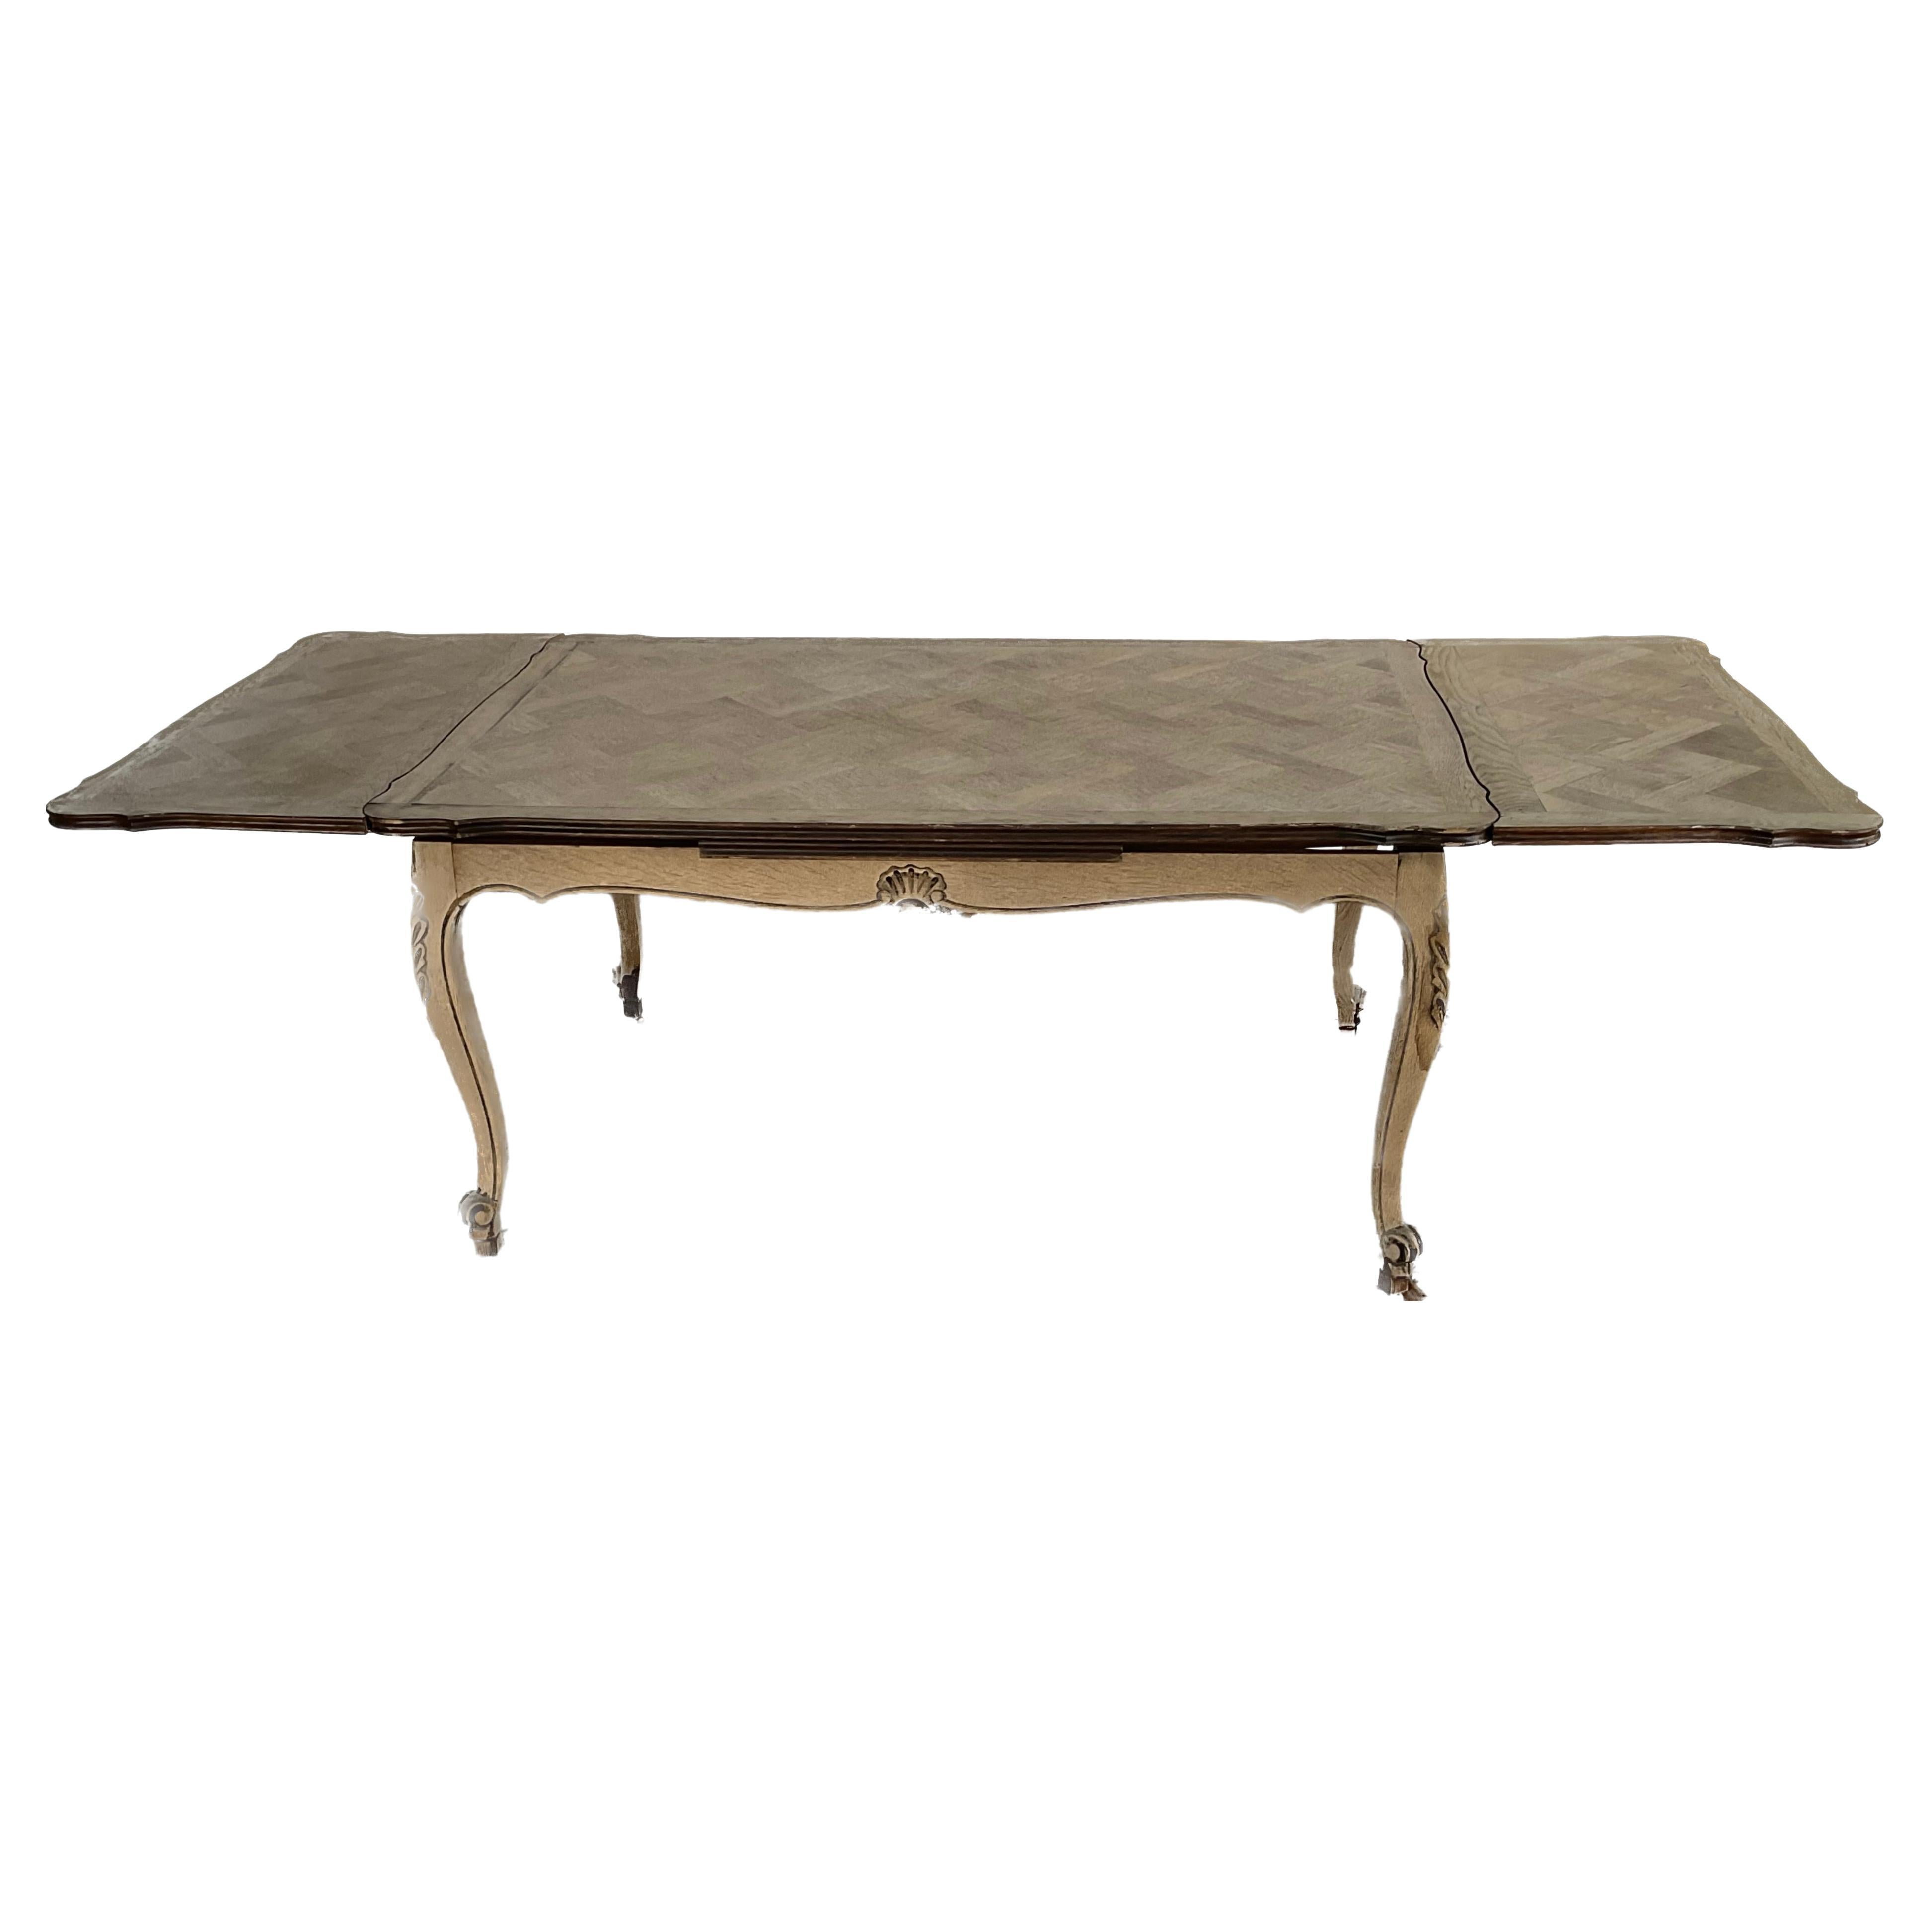 French Provincial Parquetry Top Extension Dining Table